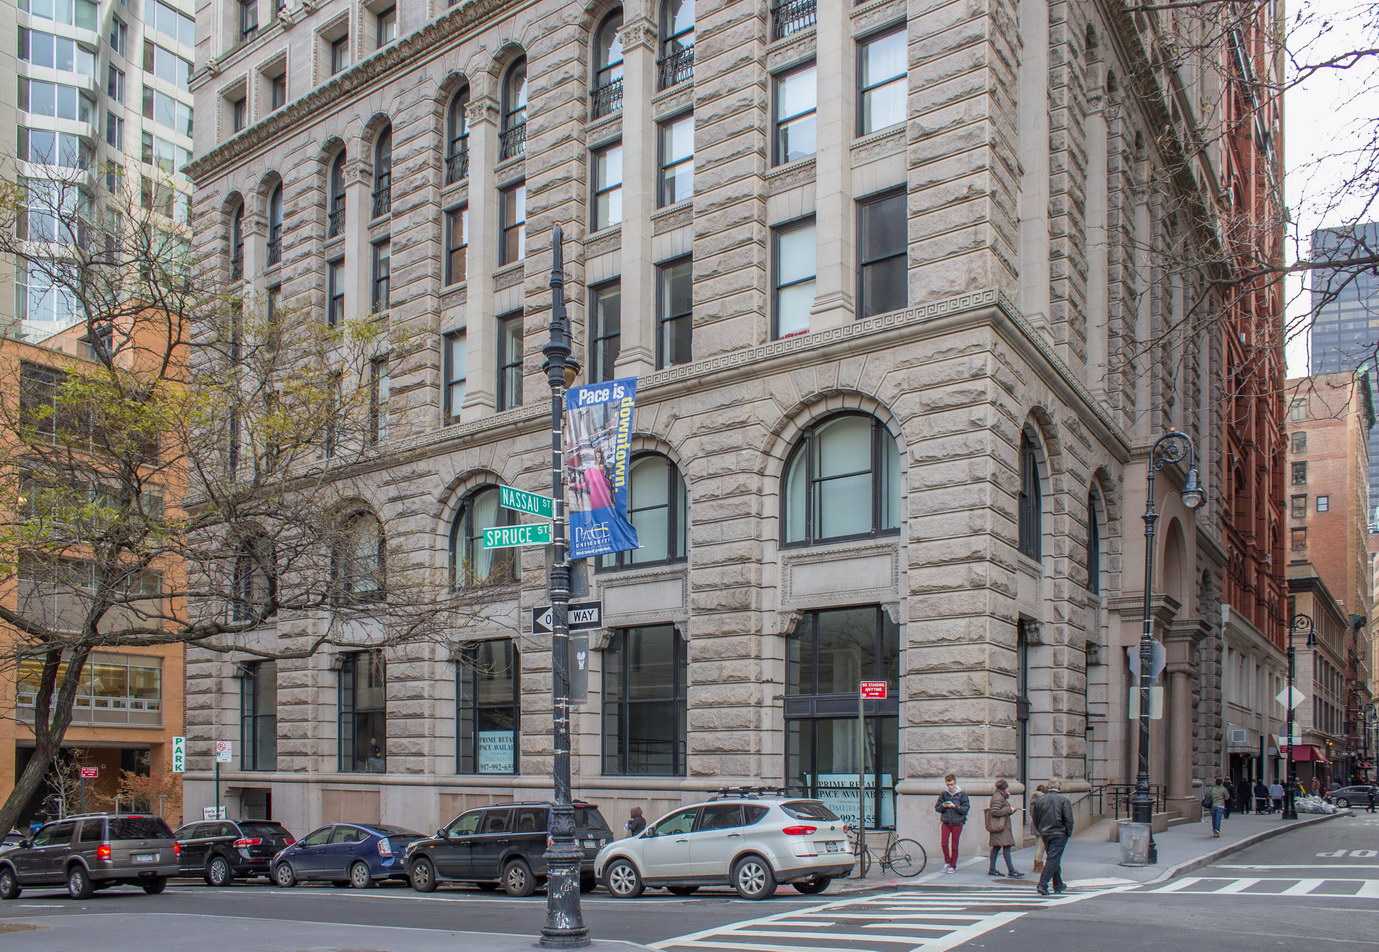 The building was owned for a while by Pace University. It is now residential, except for ground floor retail space.